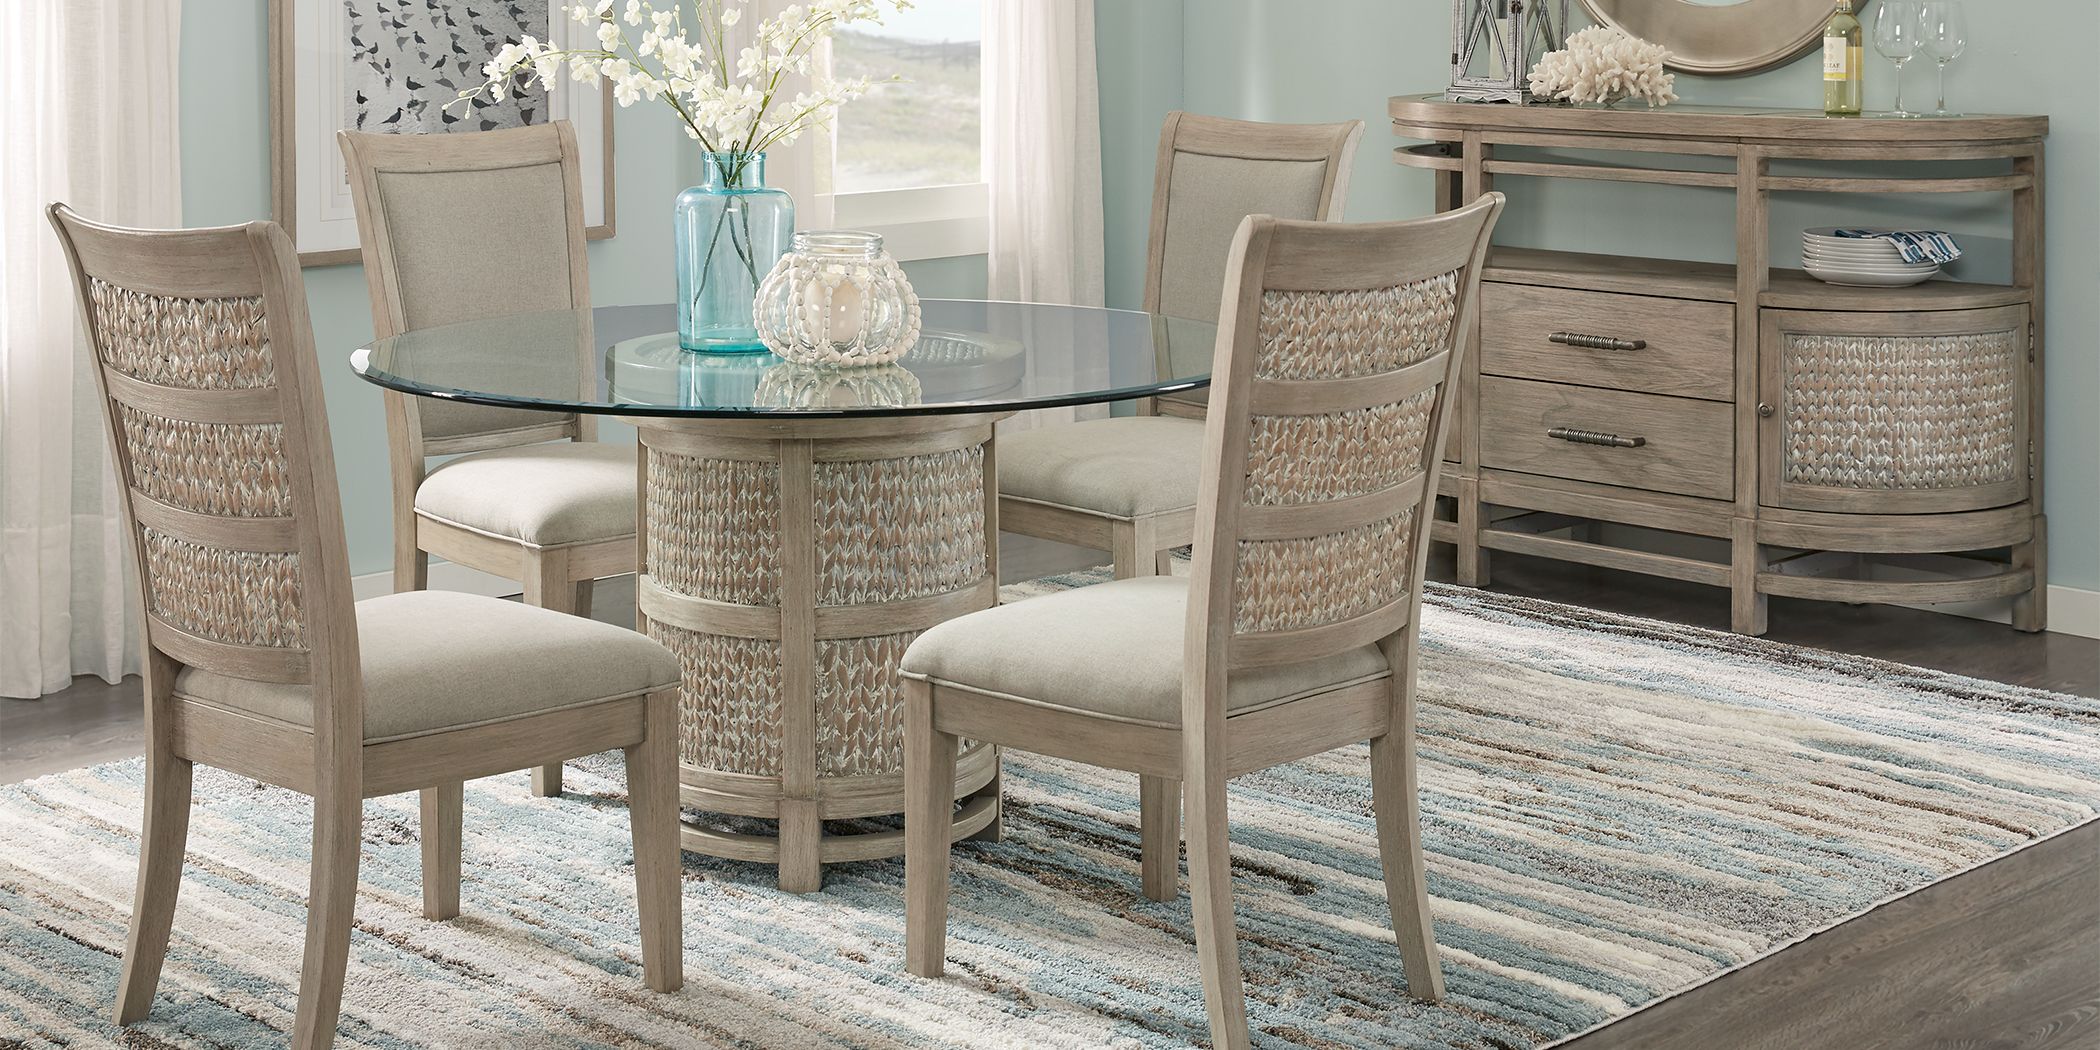 5 Pc Round Dining Room, Rooms To Go Cindy Crawford Dining Room Sets